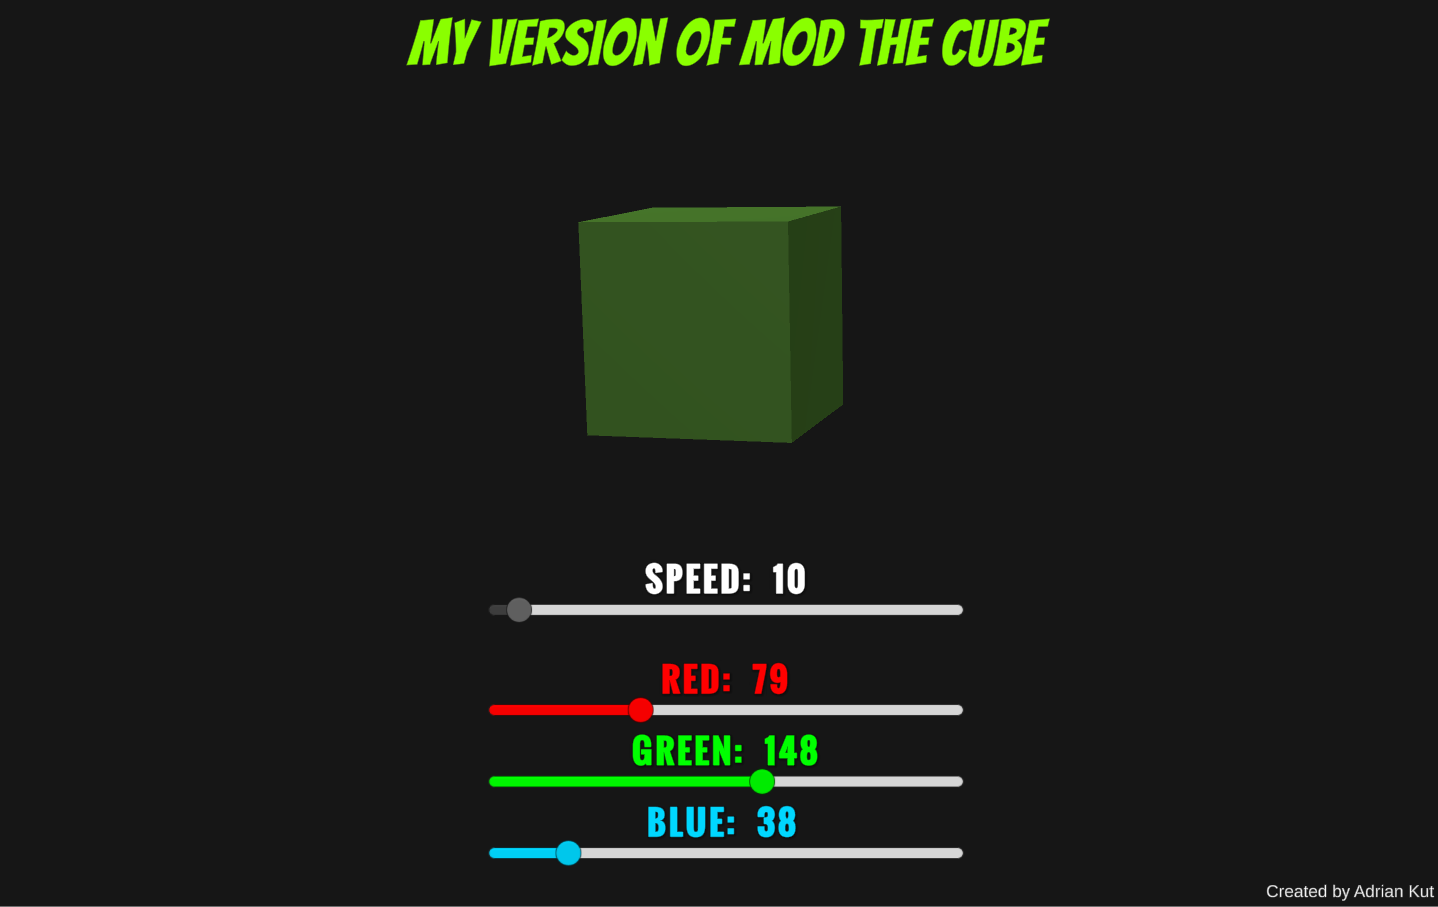 Mode the Cube Challenge